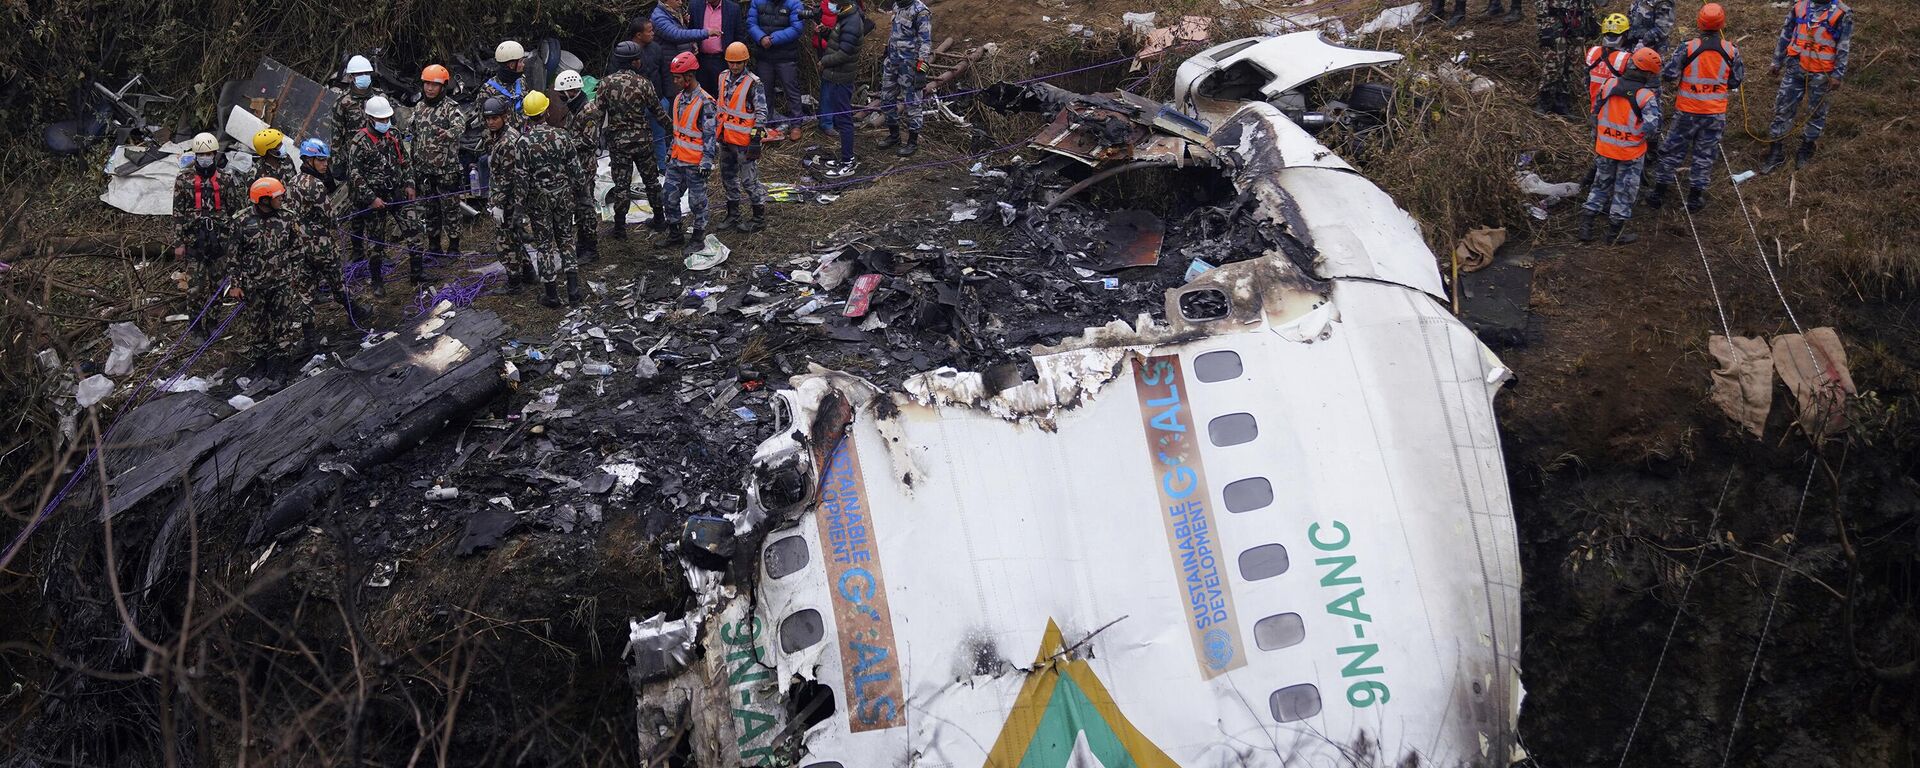 Rescuers scour the crash site in the wreckage of a passenger plane in Pokhara, Nepal, Monday, Jan.16, 2023. - Sputnik India, 1920, 16.01.2023